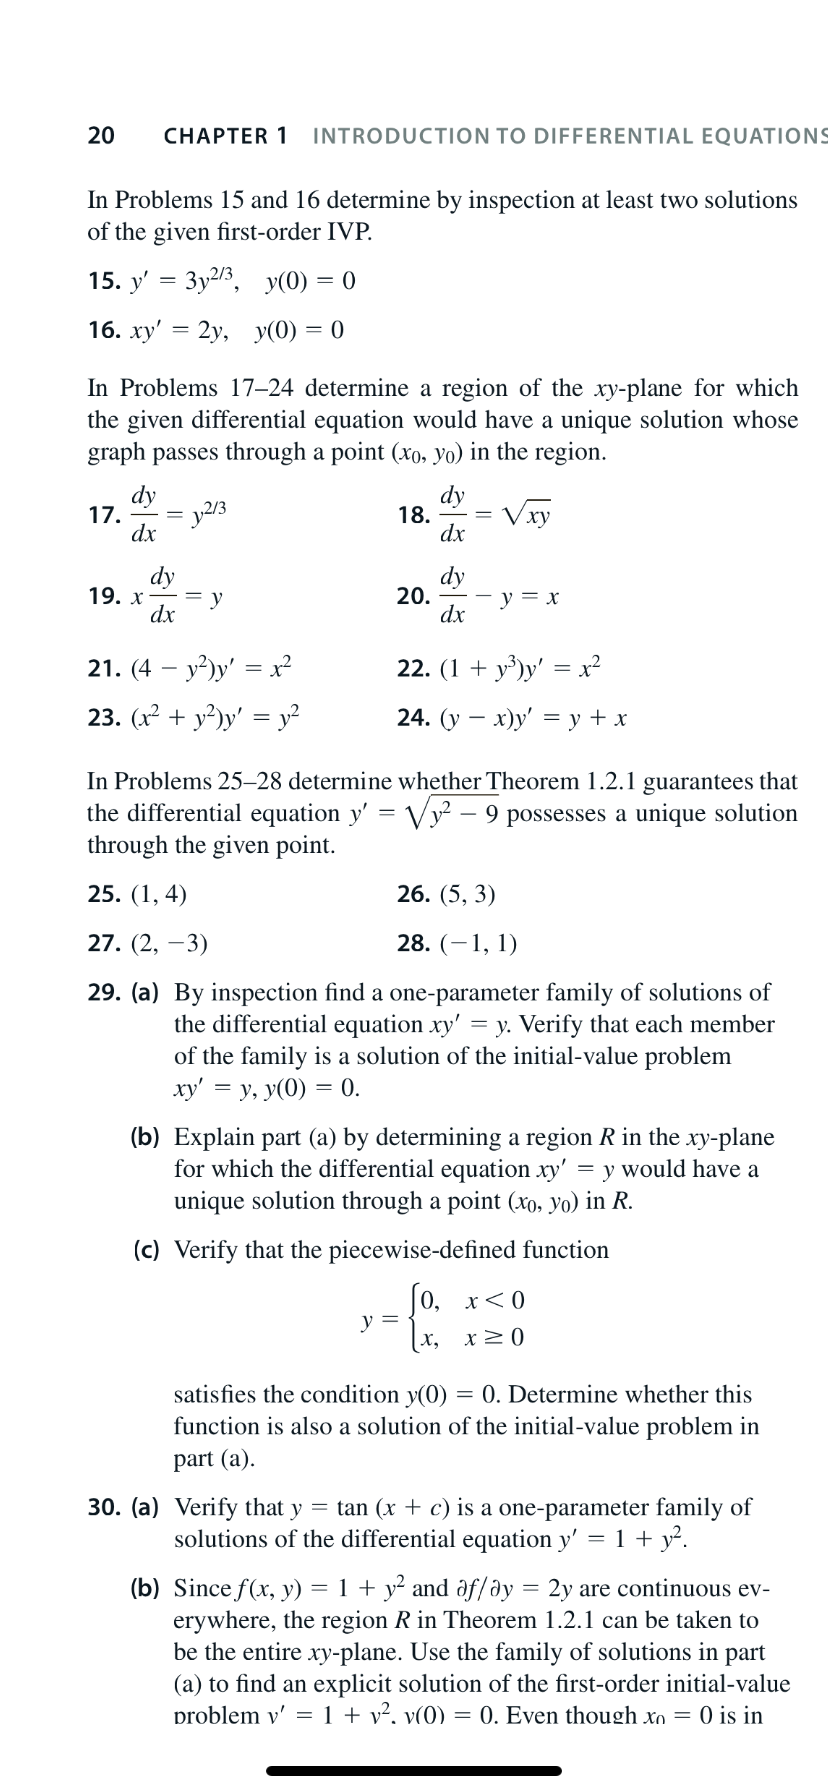 INTRODUCTION TO DIFFERENTIAL EQUATIONS
20
CHAPTER 1
In Problems 15 and 16 determine by inspection at least two solutions
of the given first-order IVP.
3y2/3, y(0) = 0
15. y'
16. ху' — 2у, у(0) — 0
In Problems 17–24 determine a region of the xy-plane for which
the given differential equation would have a unique solution whose
graph passes through a point (xo, yo) in the region.
dy
dy
= y2/3
17.
dx
18.
Vху
dx
dy
19. х
dx
dy
20.
у3 х
dx
y²)y' = x²
22. (1 + y³)y' = x²
21. (4
23. (х2 + у?)у'
у?
24. (у — х)у' %— у+x
In Problems 25–28 determine whether Theorem 1.2.1 guarantees that
the differential equation y' = Vy2 – 9 possesses a unique solution
through the given point.
25. (1, 4)
26. (5, 3)
28. (–1, 1)
27. (2, –3)
29. (a) By inspection find a one-parameter family of solutions of
the differential equation xy' = y. Verify that each member
of the family is a solution of the initial-value problem
xy' = y, y(0) = 0.
(b) Explain part (a) by determining a region R in the xy-plane
for which the differential equation xy' = y would have a
unique solution through a point (xo, yo) in R.
(c) Verify that the piecewise-defined function
|0, х<0
y =
satisfies the condition y(0)
function is also a solution of the initial-value problem in
= 0. Determine whether this
part (a).
30. (a) Verify that y = tan (x + c) is a one-parameter family of
solutions of the differential equation y' = 1 + y².
(b) Since f(x, y)
erywhere, the region R in Theorem 1.2.1 can be taken to
be the entire xy-plane. Use the family of solutions in part
(a) to find an explicit solution of the first-order initial-value
problem v' = 1 + v², v(0) = 0. Even though xn = 0 is in
= 1 + y? and af/əy = 2y are continuous ev-
